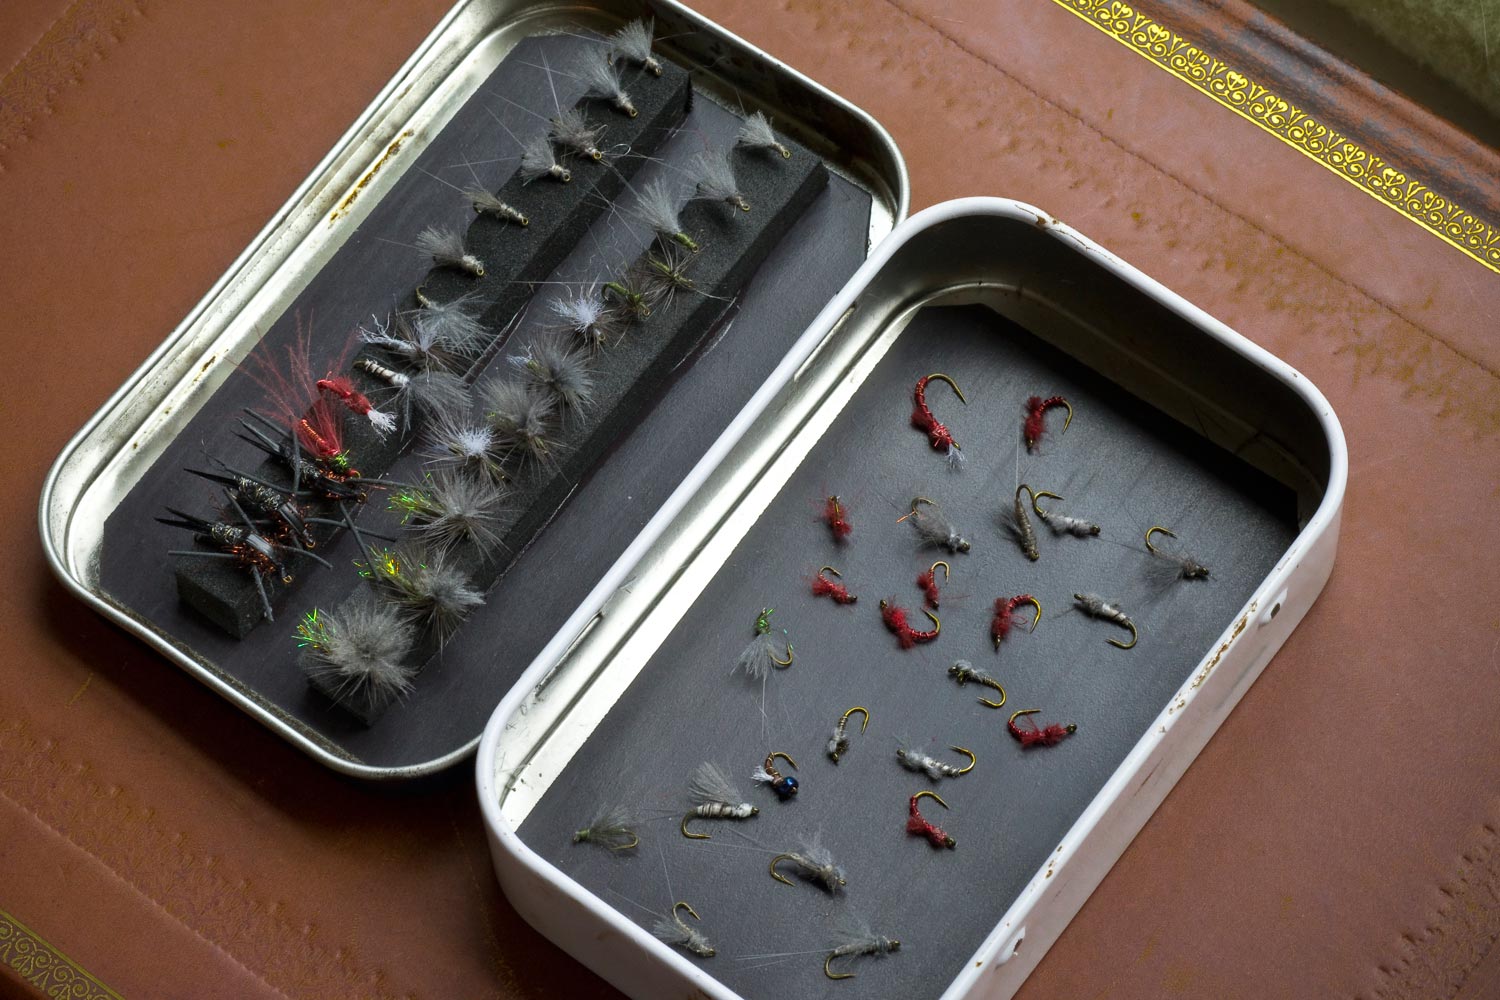 Details about   Slim Waterproof Magnetic Backeds Fishing Fly Box Flies Hooks Keeping Tackle Box 